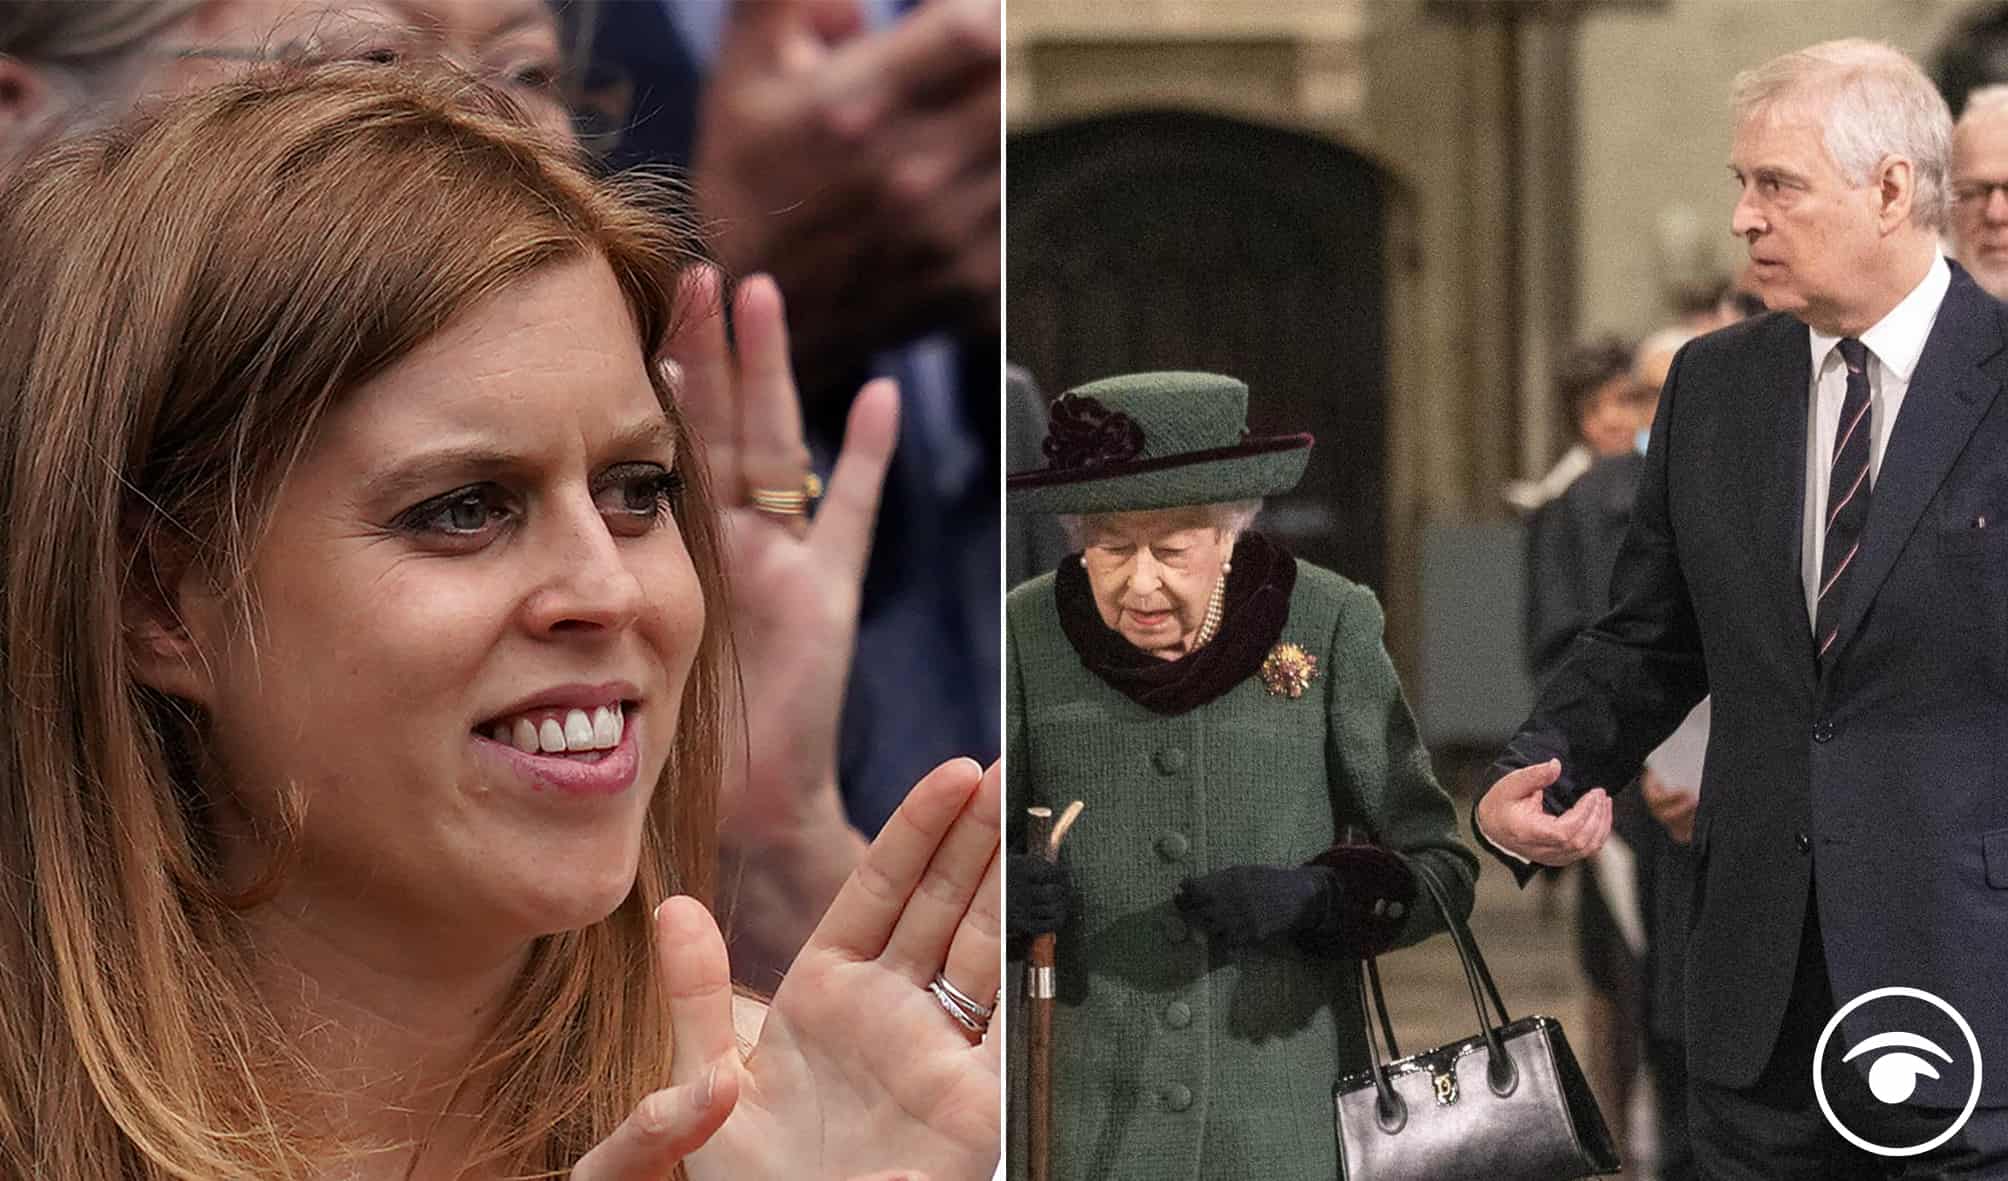 £750,000 from alleged ‘fraudster’ was to fund Beatrice’s wedding after admission from Andrew’s aide